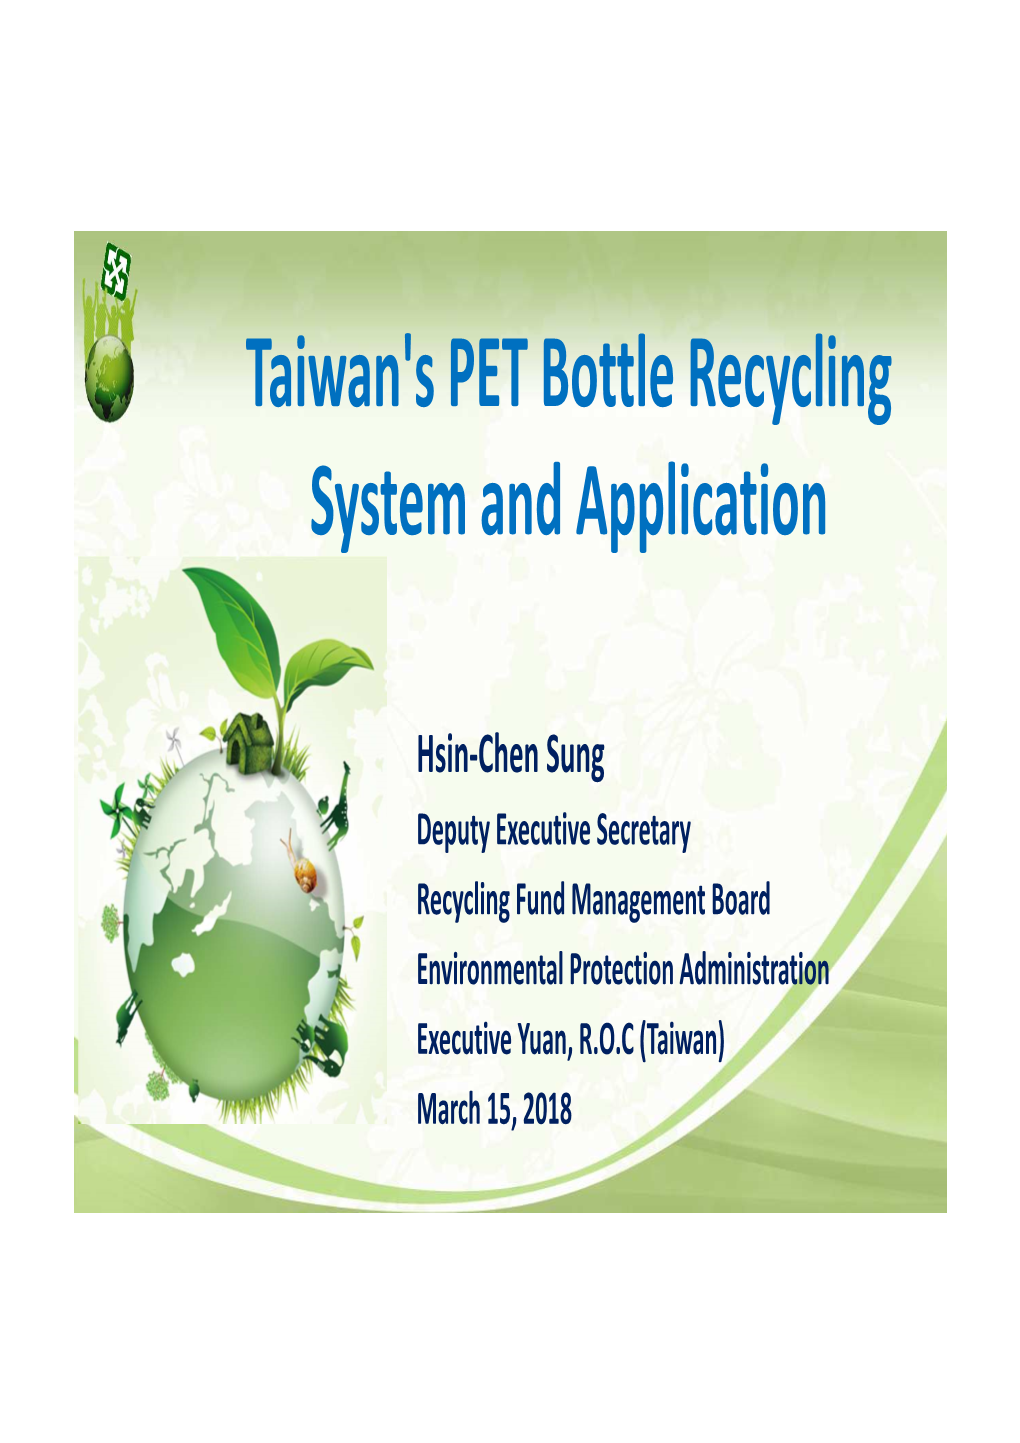 (Taiwan's PET Bottle Recycling System and Application Final